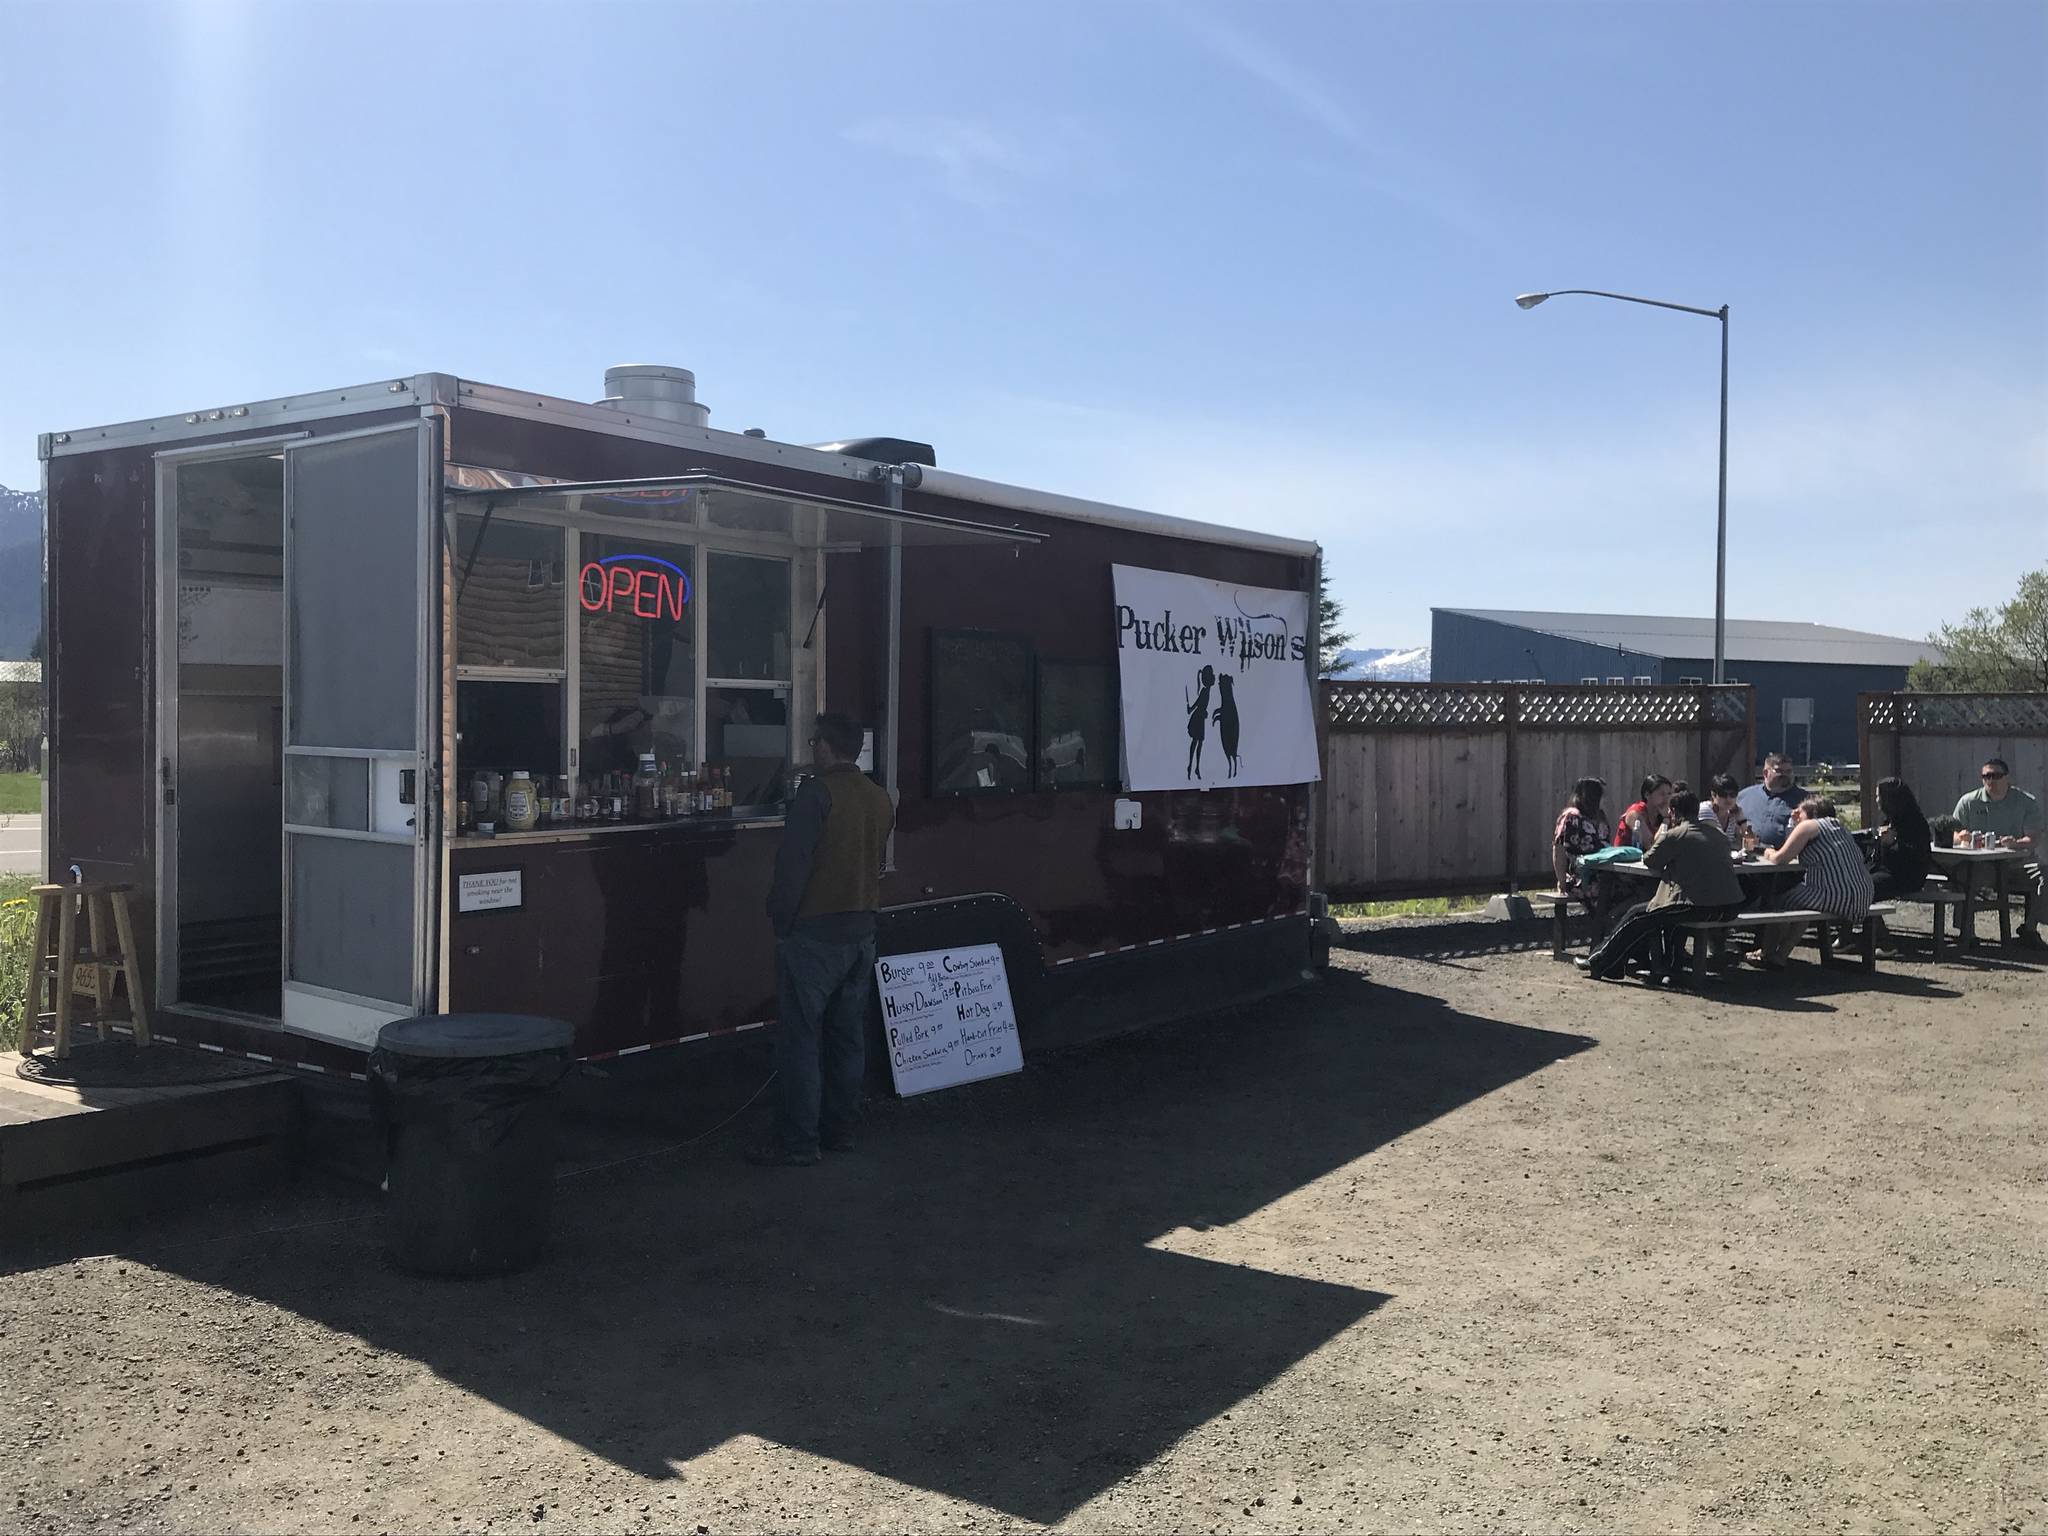 A second location for the popular food truck Pucker Wilson’s is in a lot at the Juneau Mercantile and Armory near the Juneau International Airport. (Kevin Gullufsen | Juneau Empire)